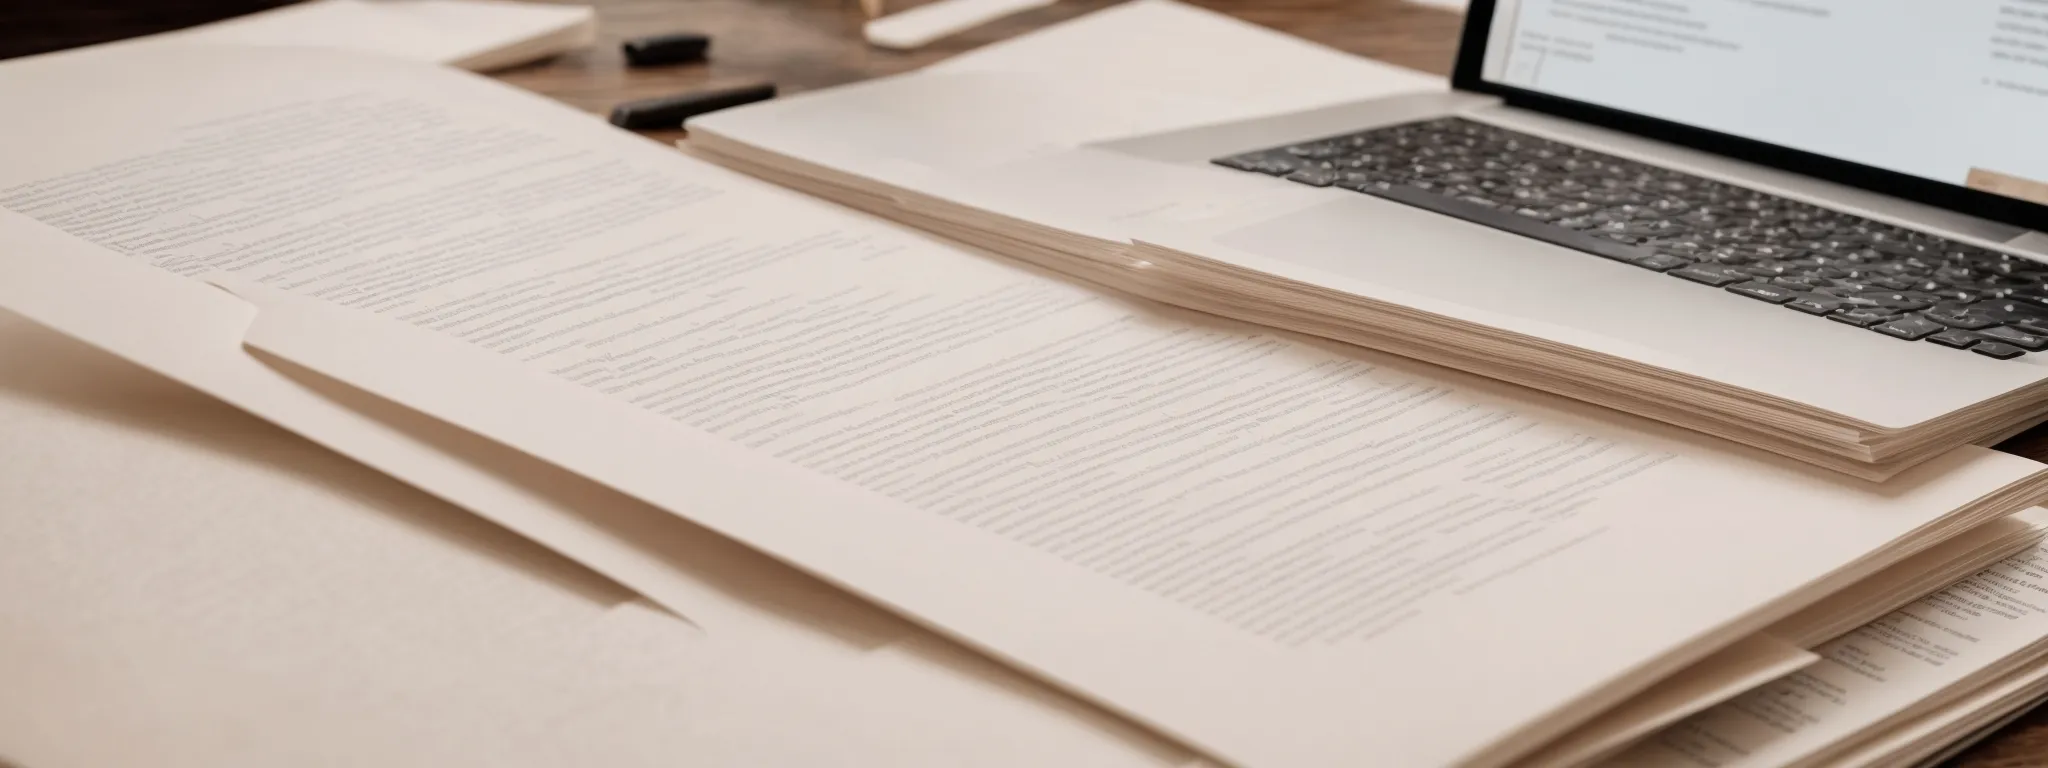 a stack of papers on a desk, each with identical paragraphs of text, beside a laptop displaying a website's homepage.